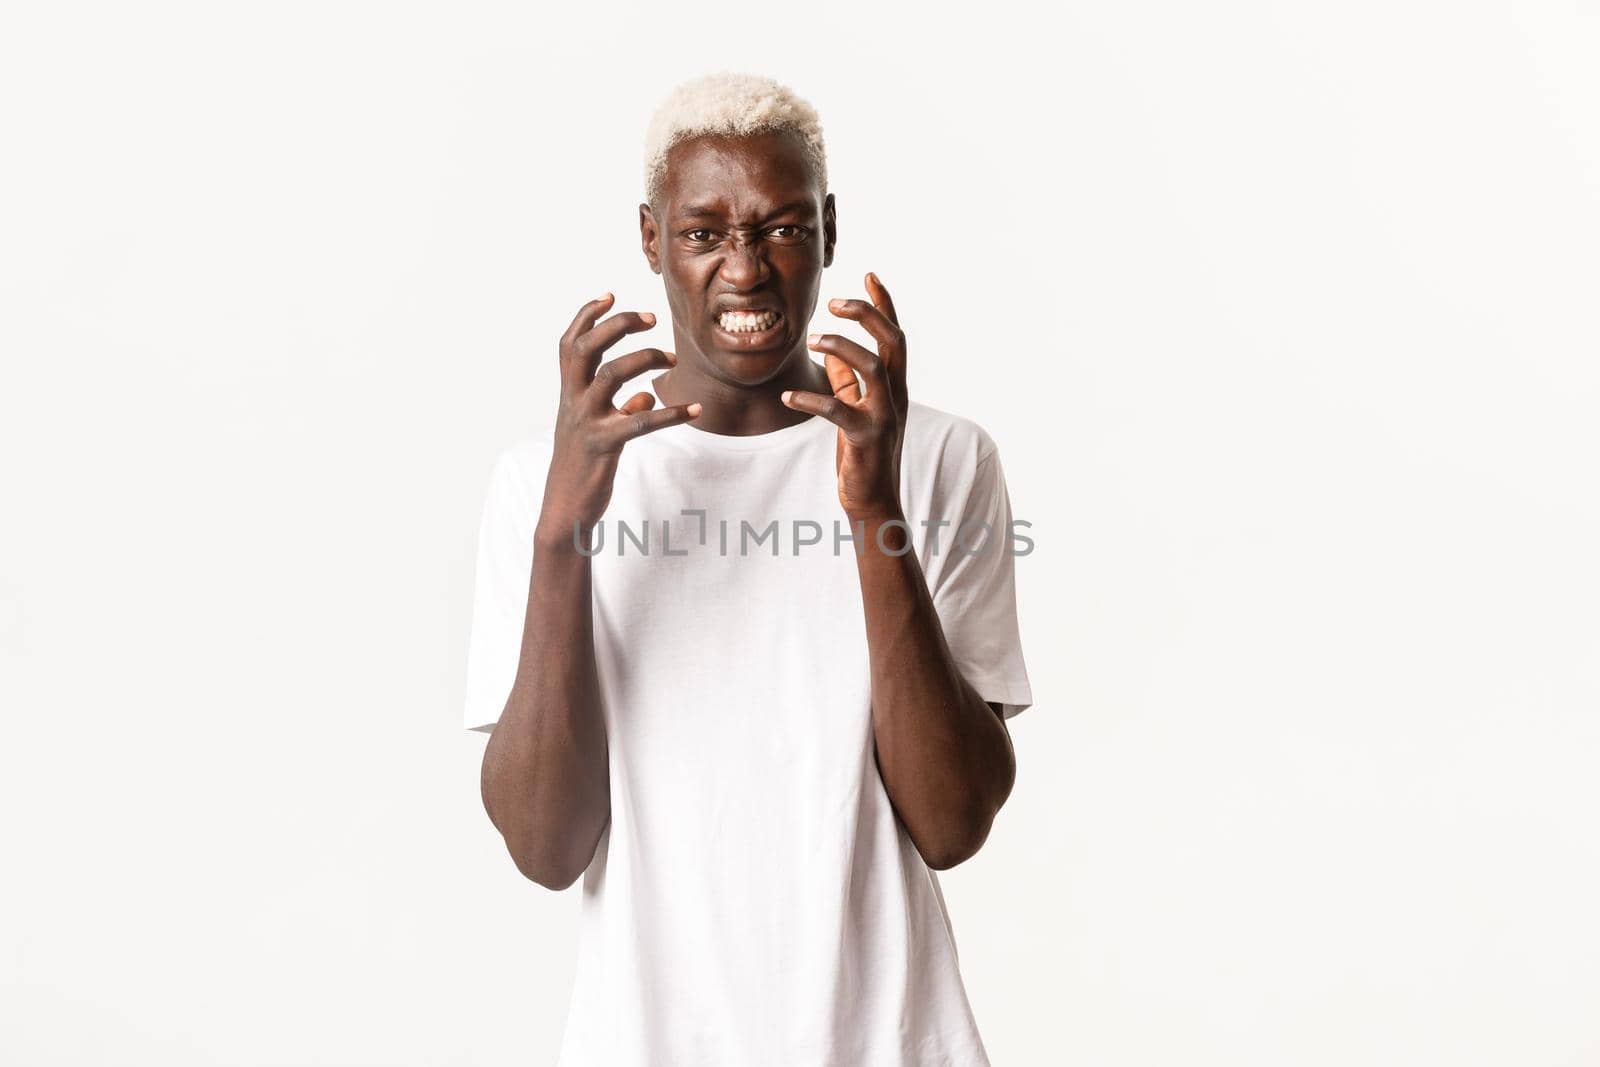 Portrait of angry african-american blond man, clenching hands and looking hateful, feeling outraged or bothered, standing over white background.